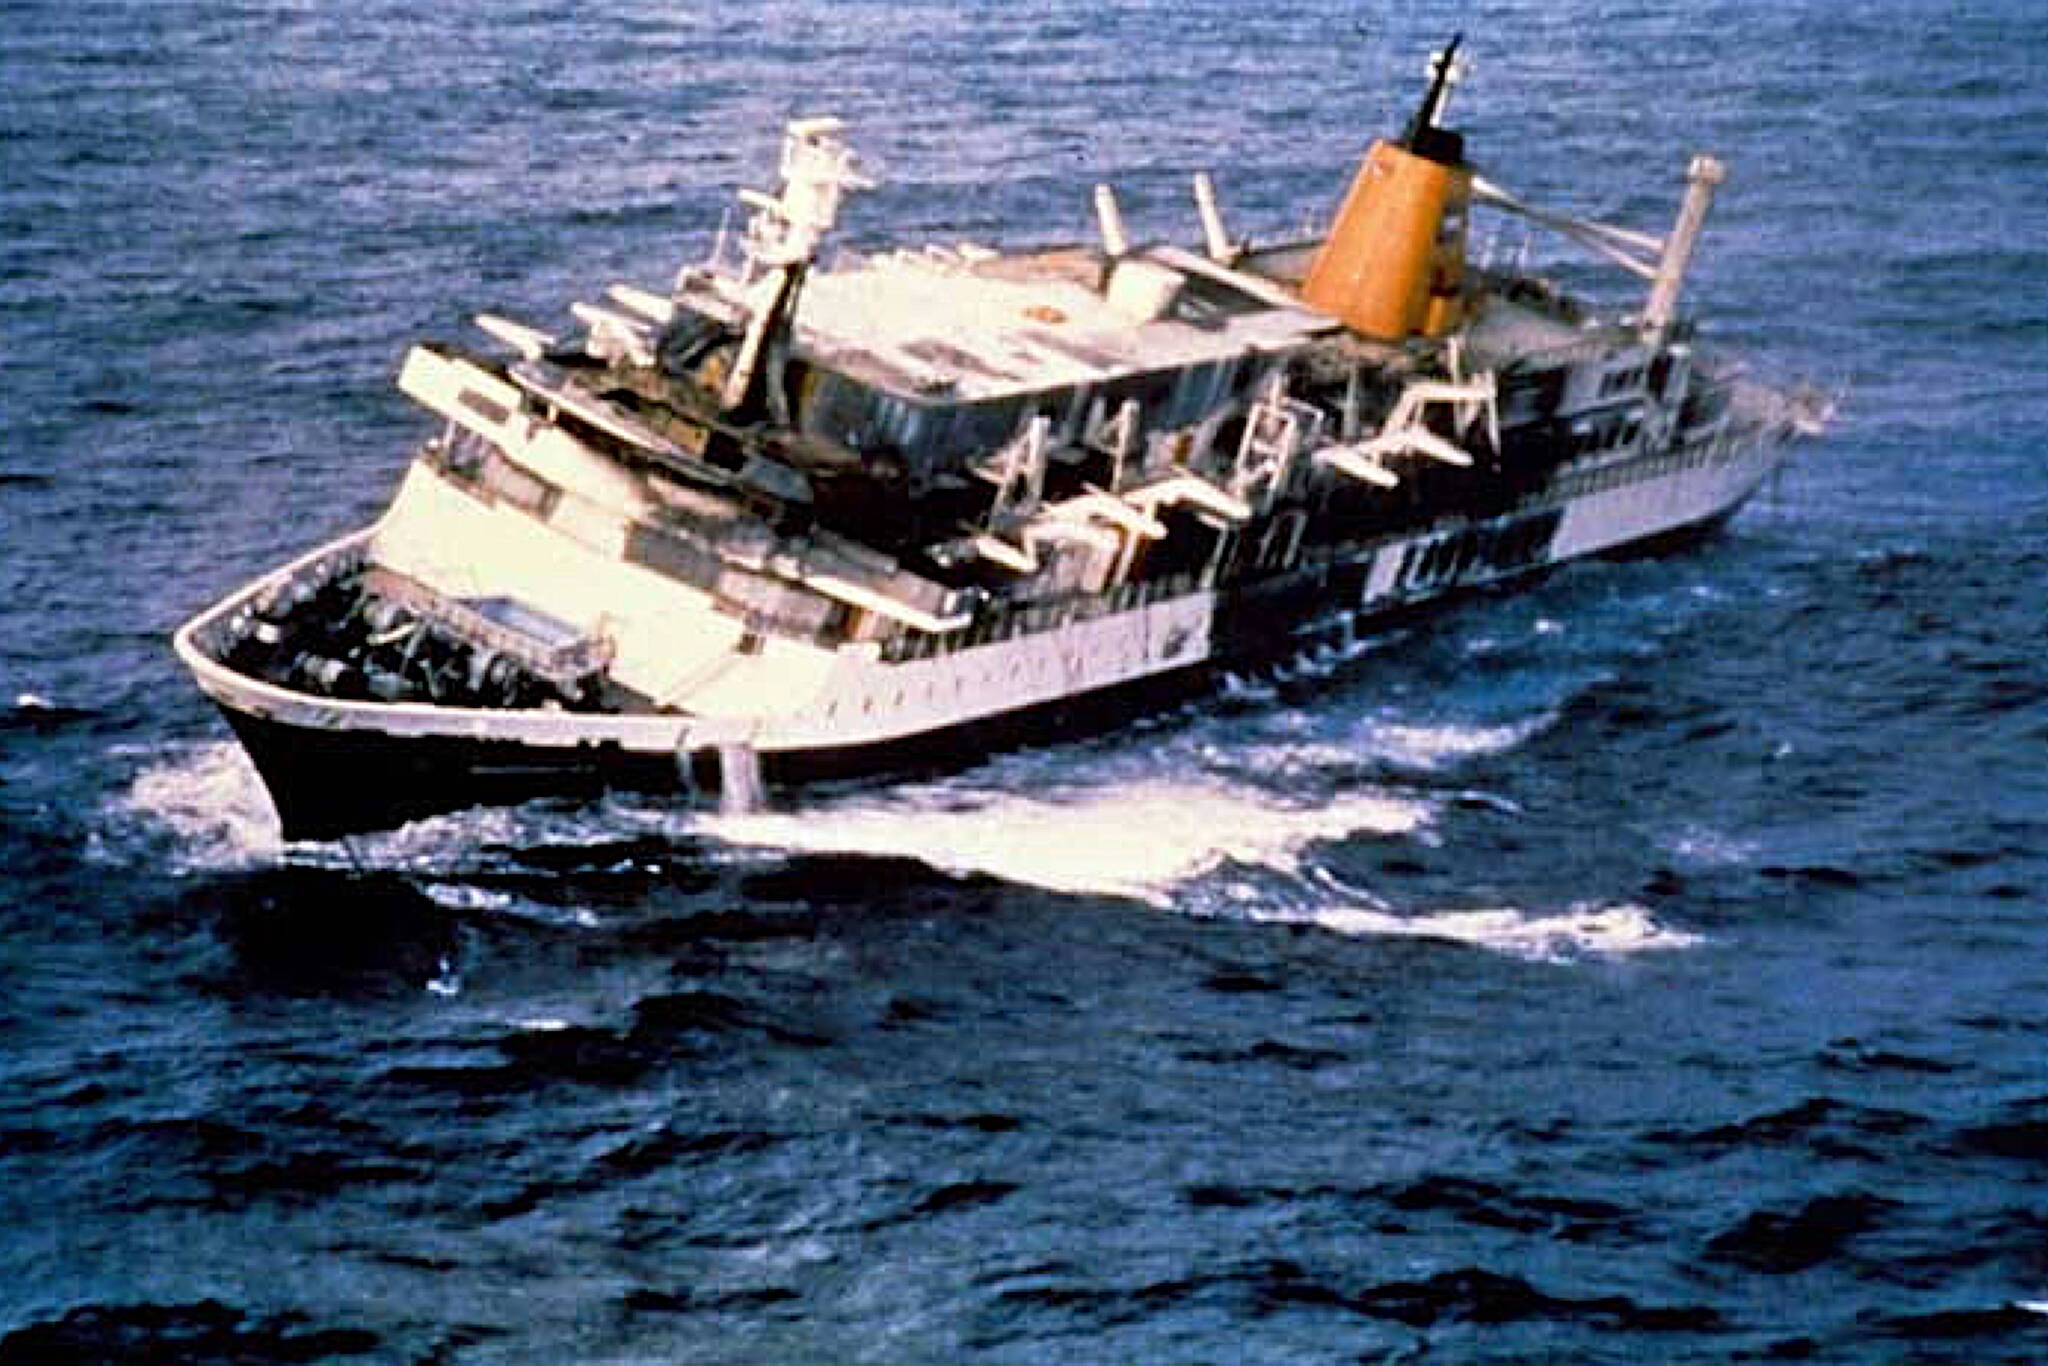 The burning cruise ship Prinsendam 200 miles from Juneau in the Gulf of Alaska in October 1980 after 519 people abandoned ship into lifeboats and were rescued. An oil leak in the engine room started a fire just as Juneau was celebrating its 100th birthday on Oct. 4. (Credit ASL-P313-12-06)